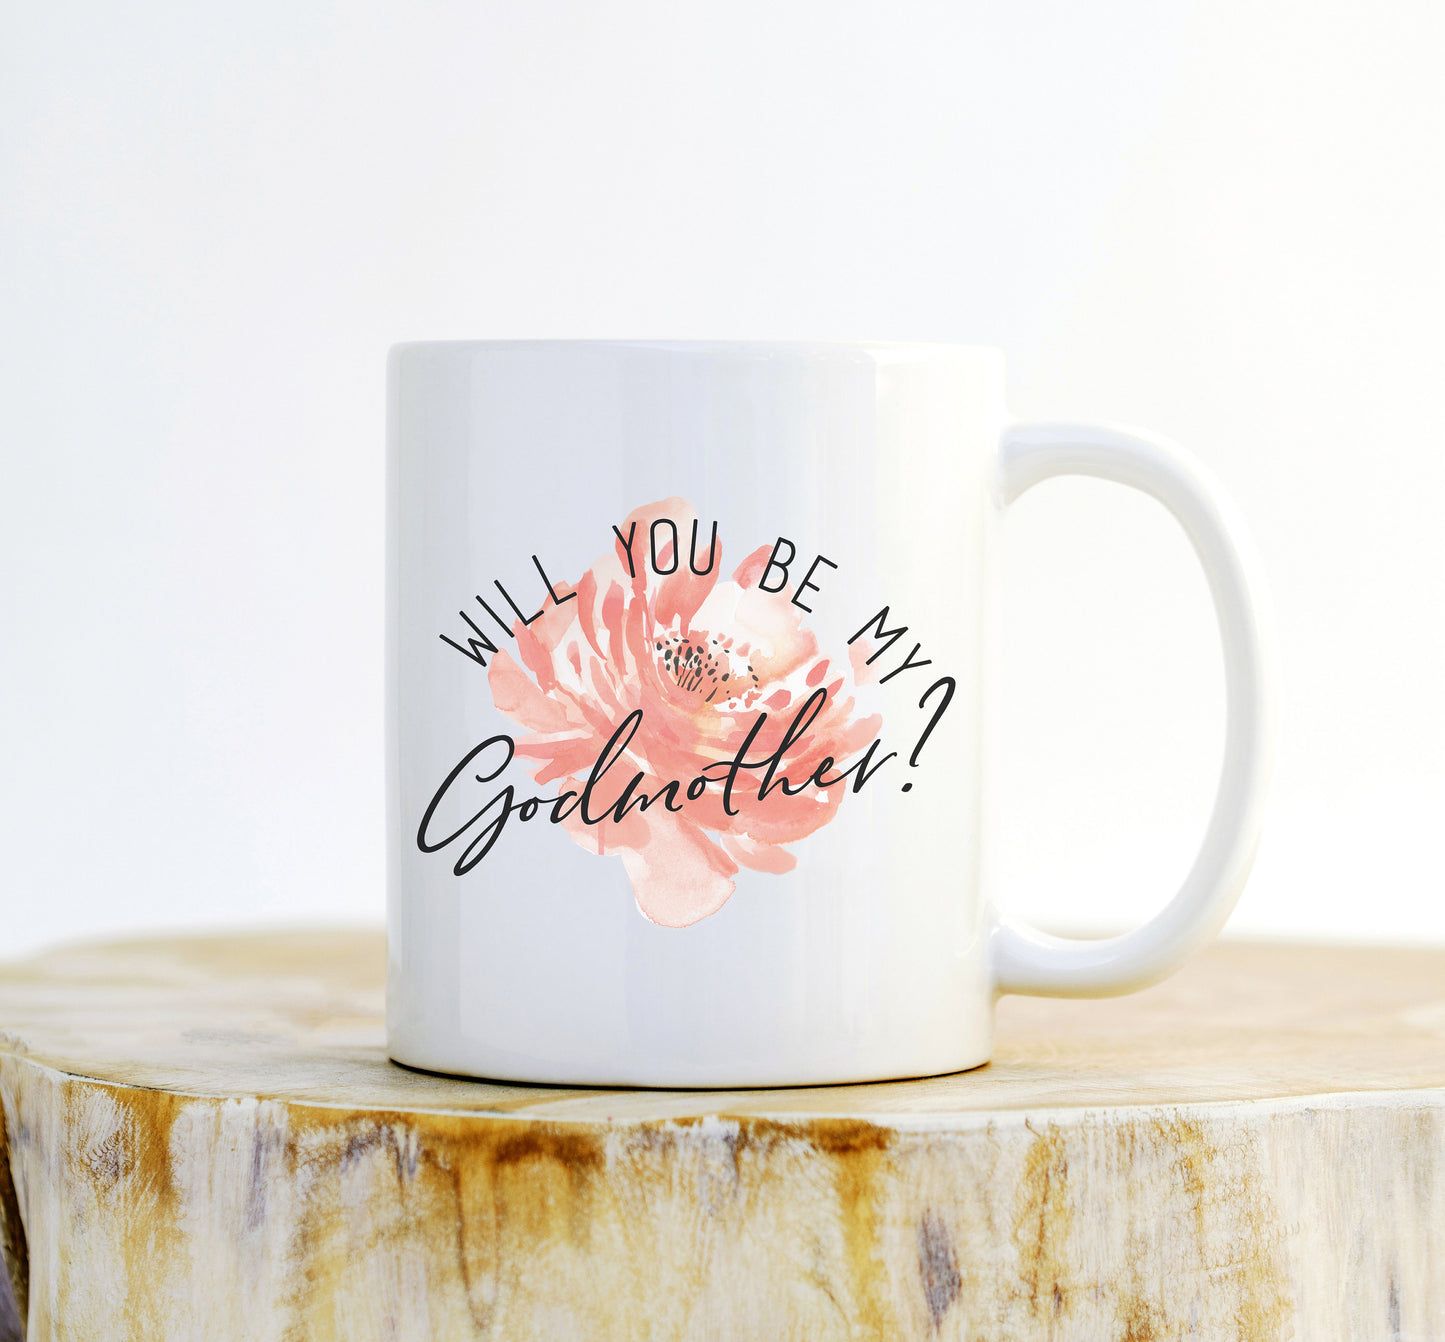 Will You Be My Godmother? Mug - Godmother Gift, Godmother Mug, Godparent Gift, Godmother Proposal, Baby Announcement